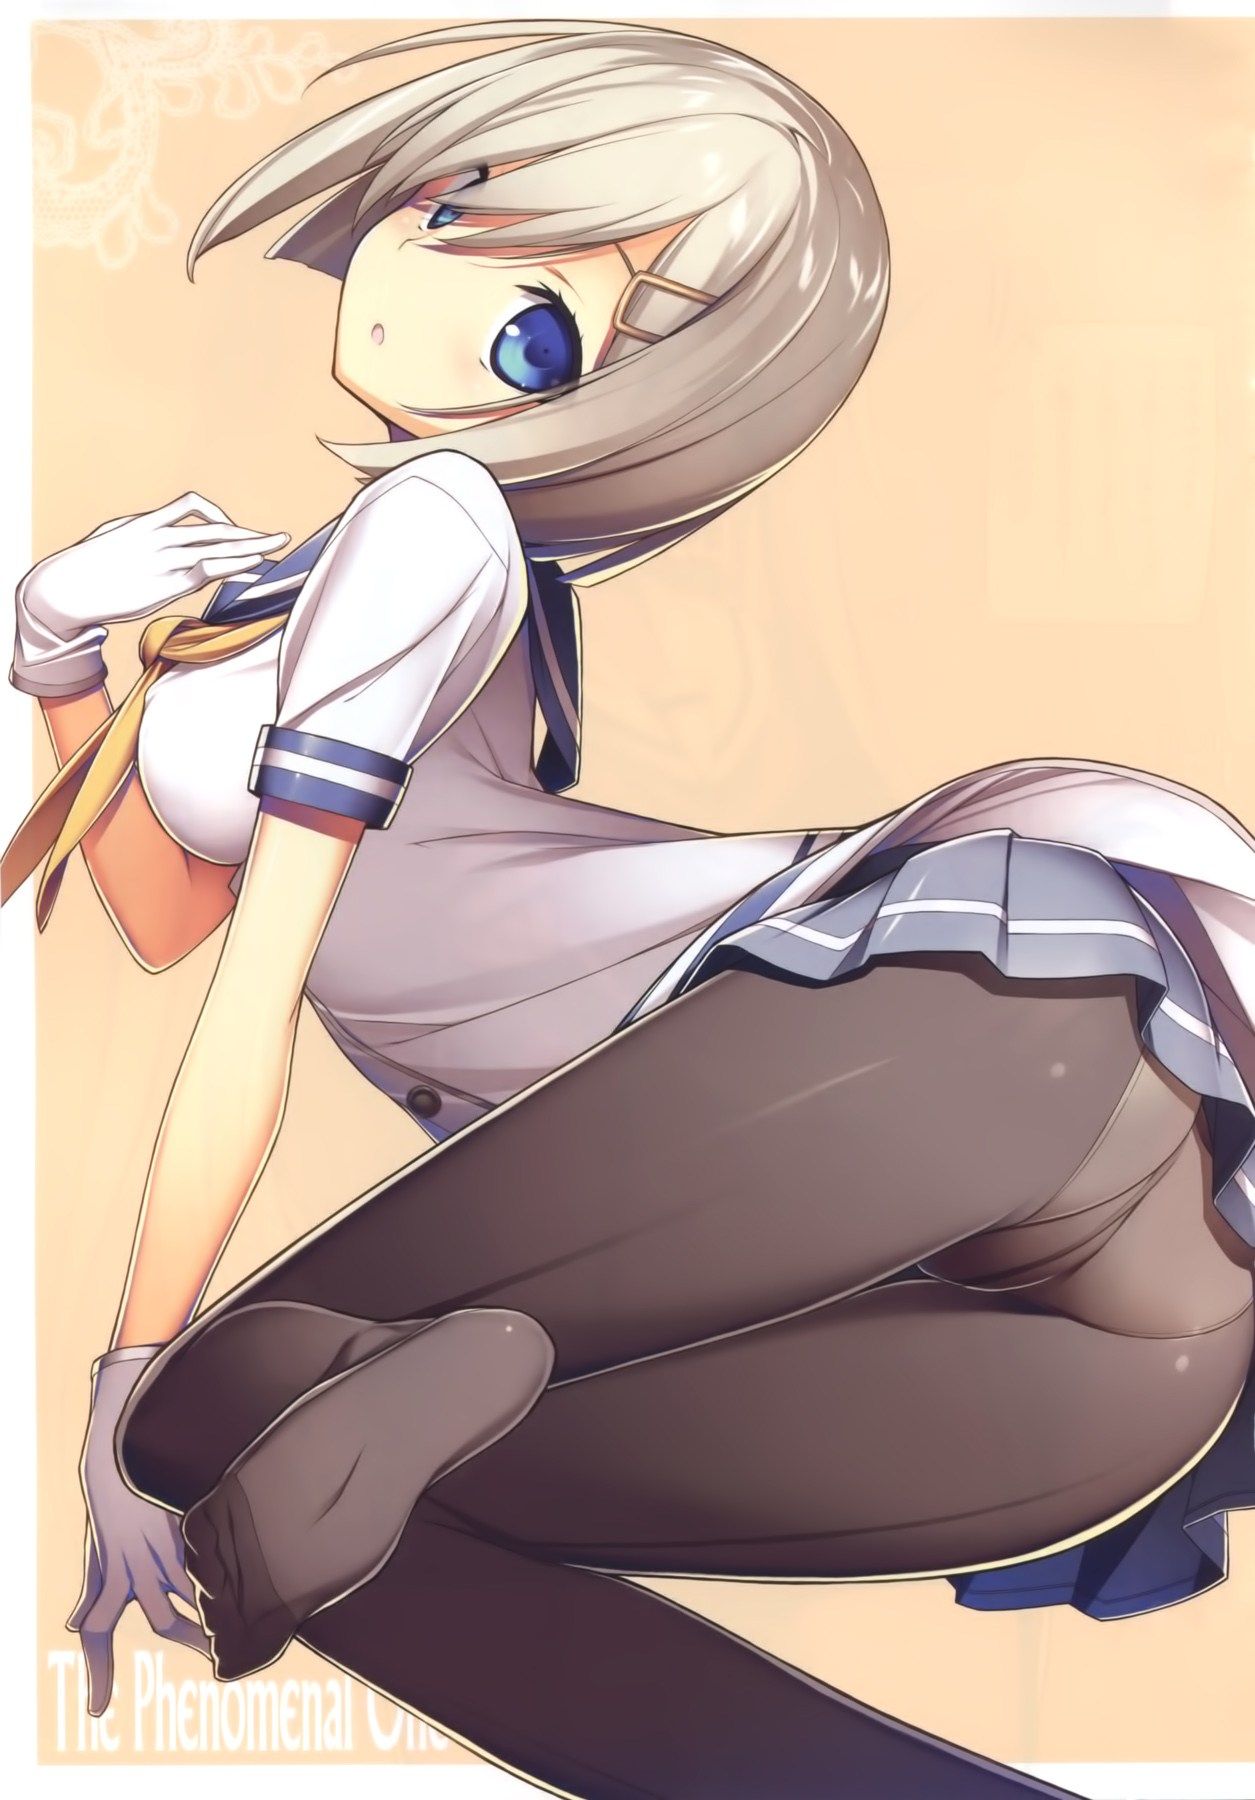 Why is a girl's ass so much so big? 2D erotic image of a girl who has a butt that becomes just by looking at it 6